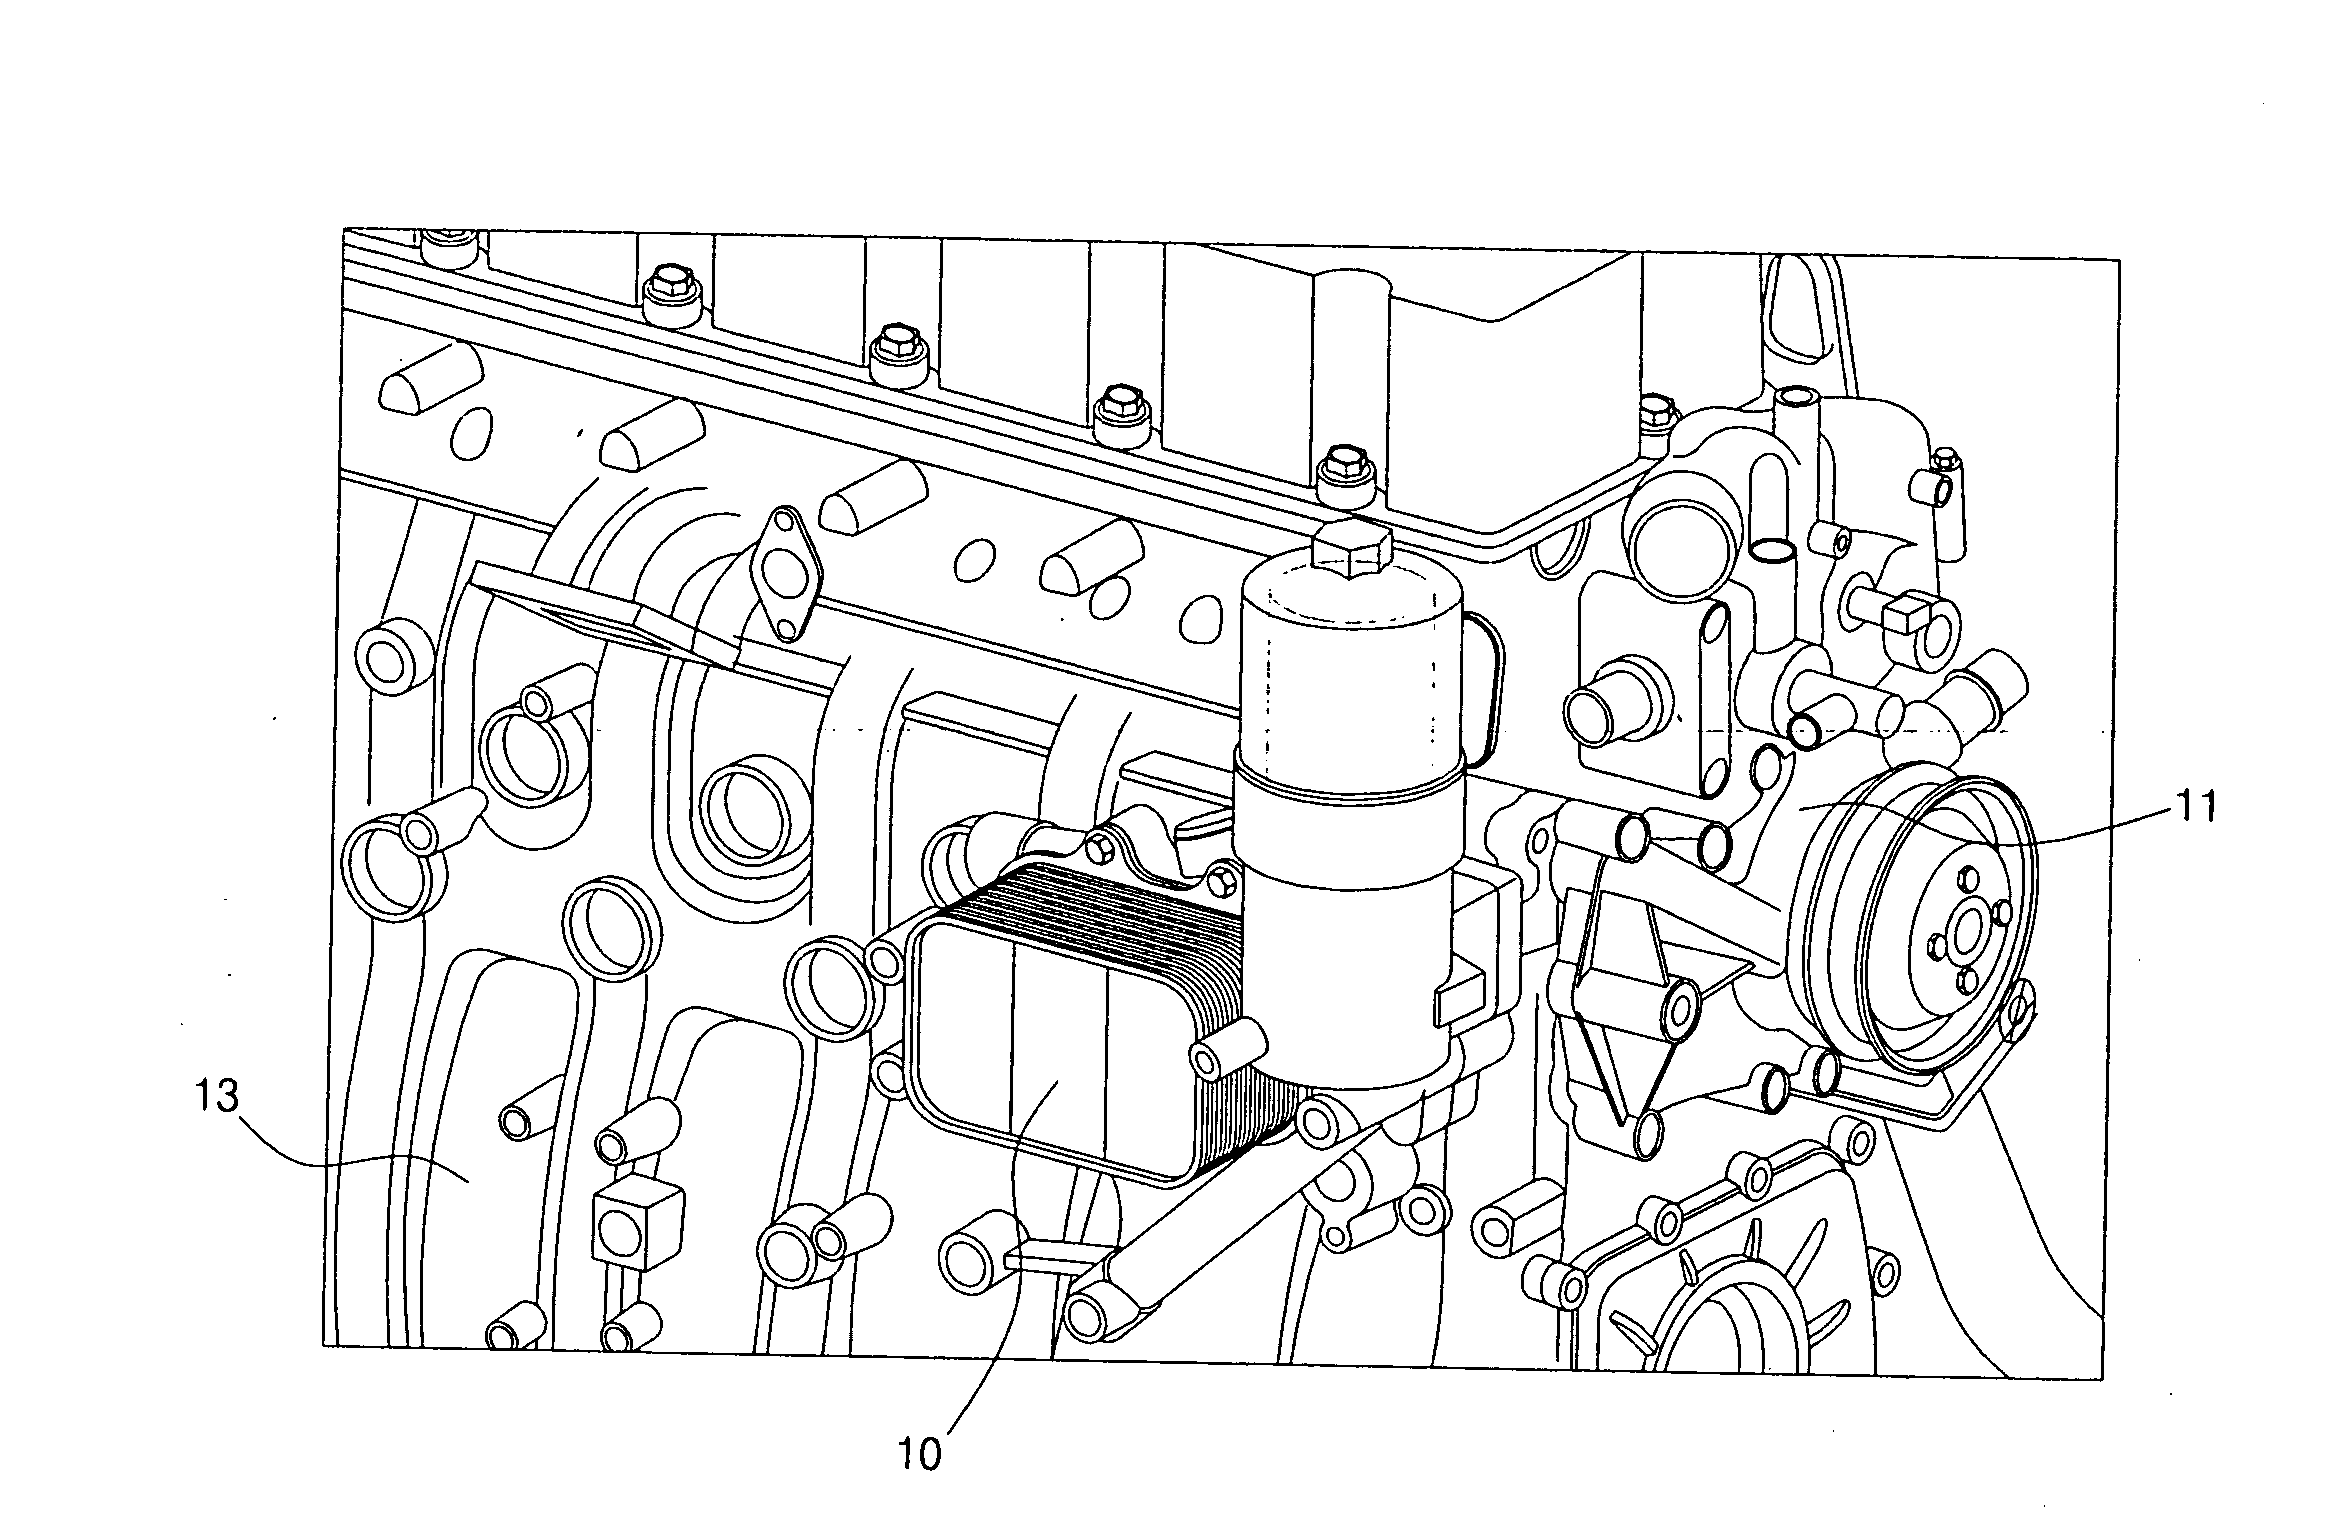 Cooling circuit of oil cooler for vehicle